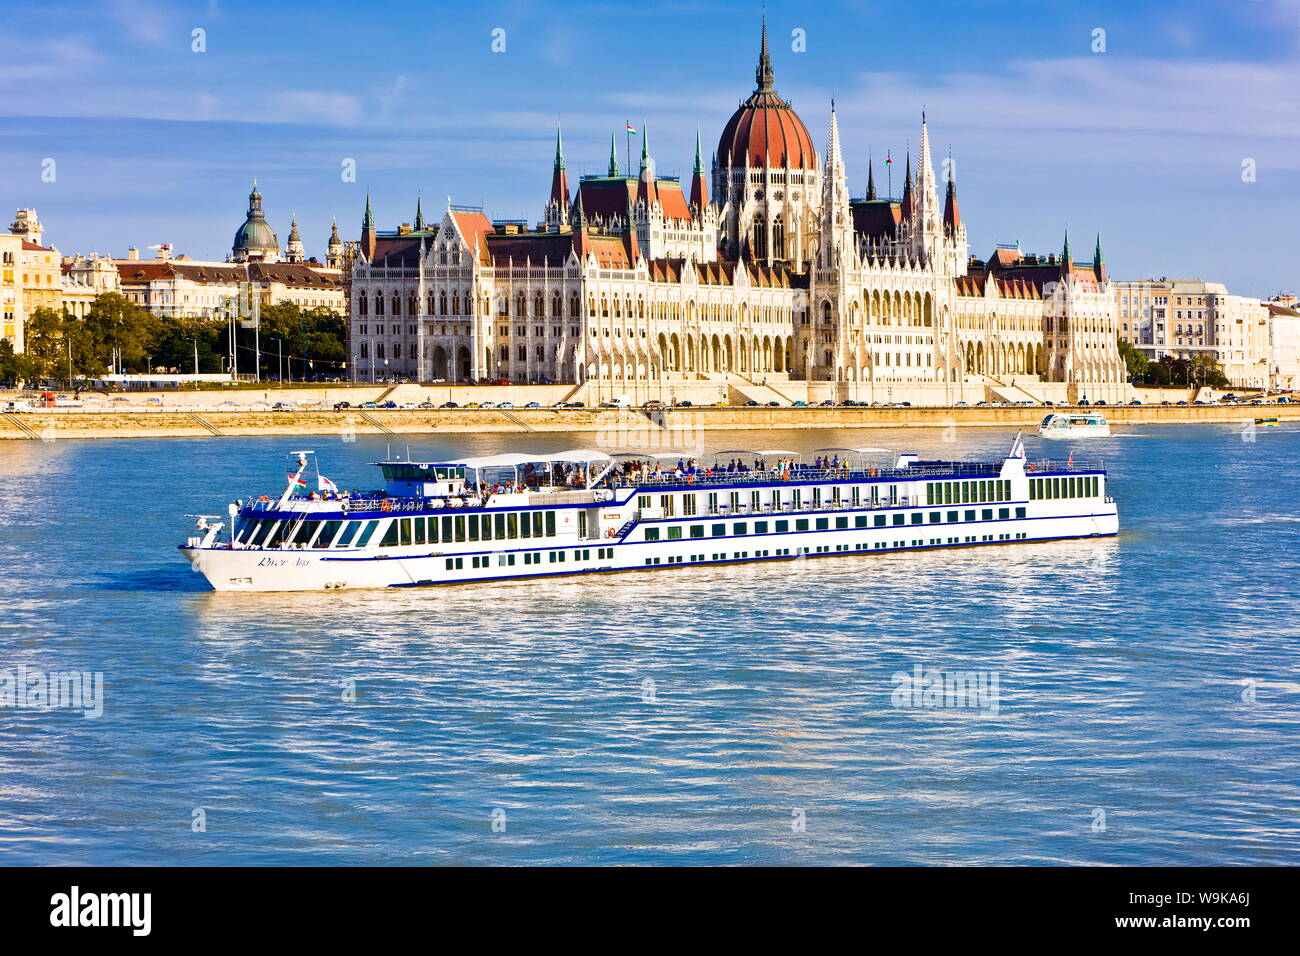 Cruise ship passing the Parliament on the Danube, Budapest, Hungary, Europe Stock Photo